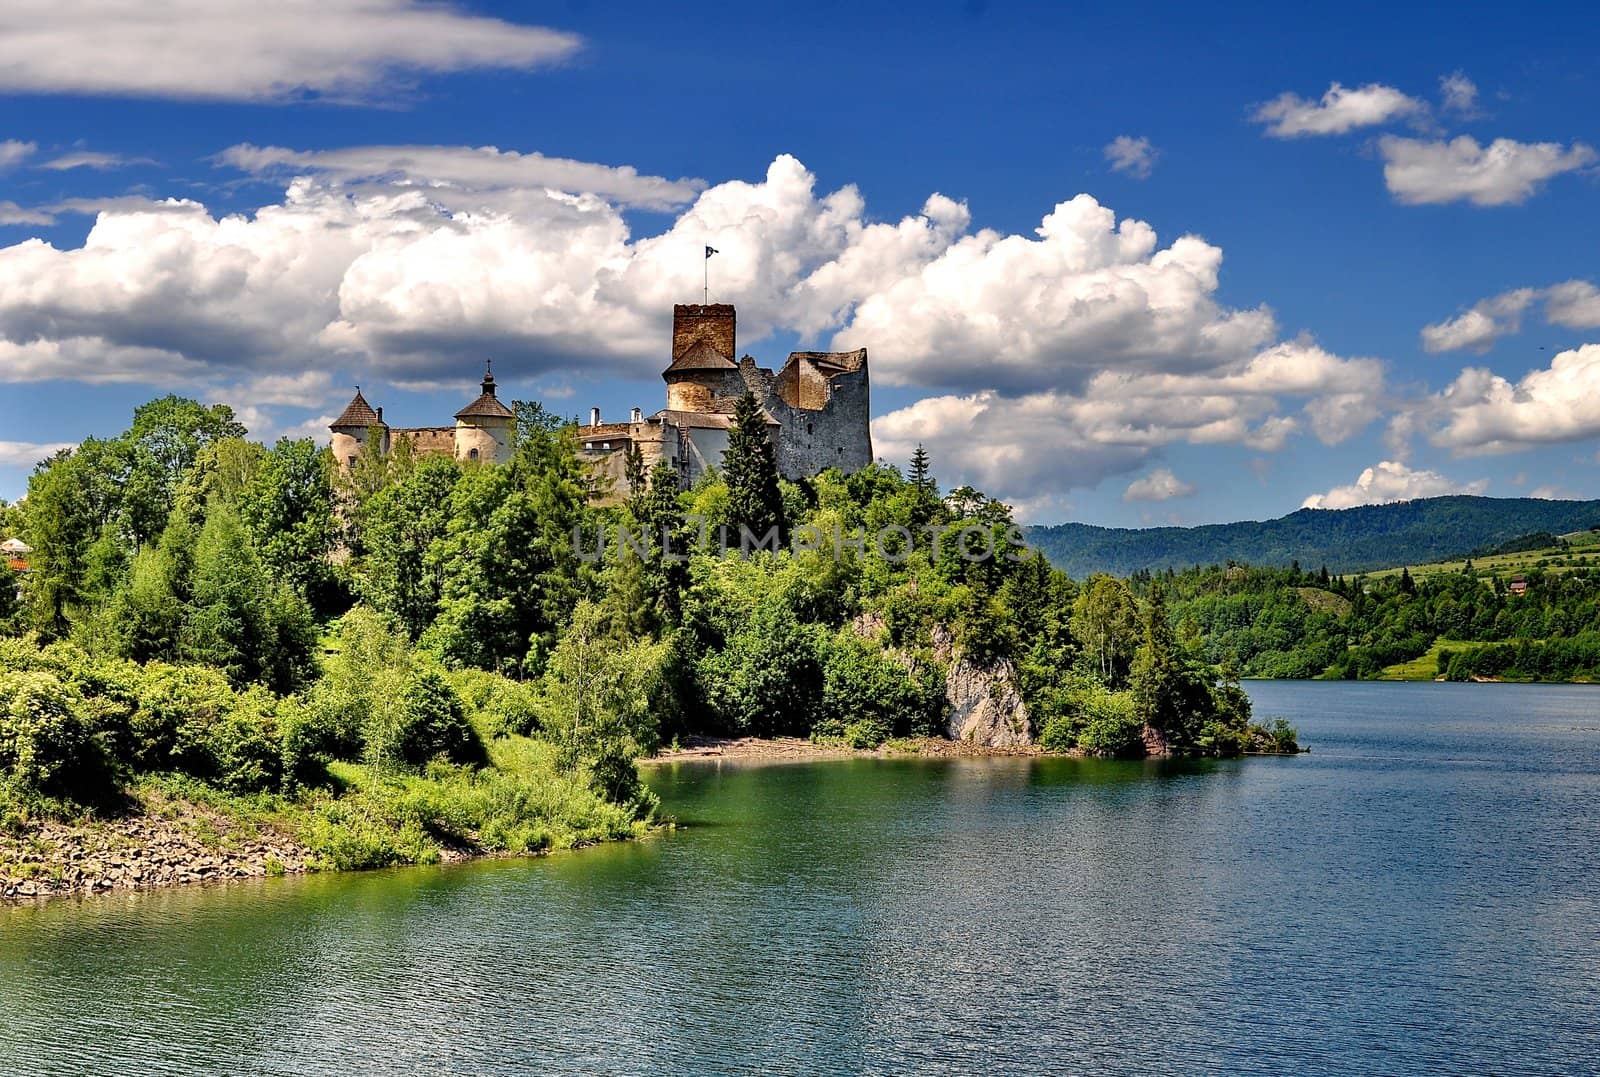 Castle on a hill besides a lake (Nedec, Poland)